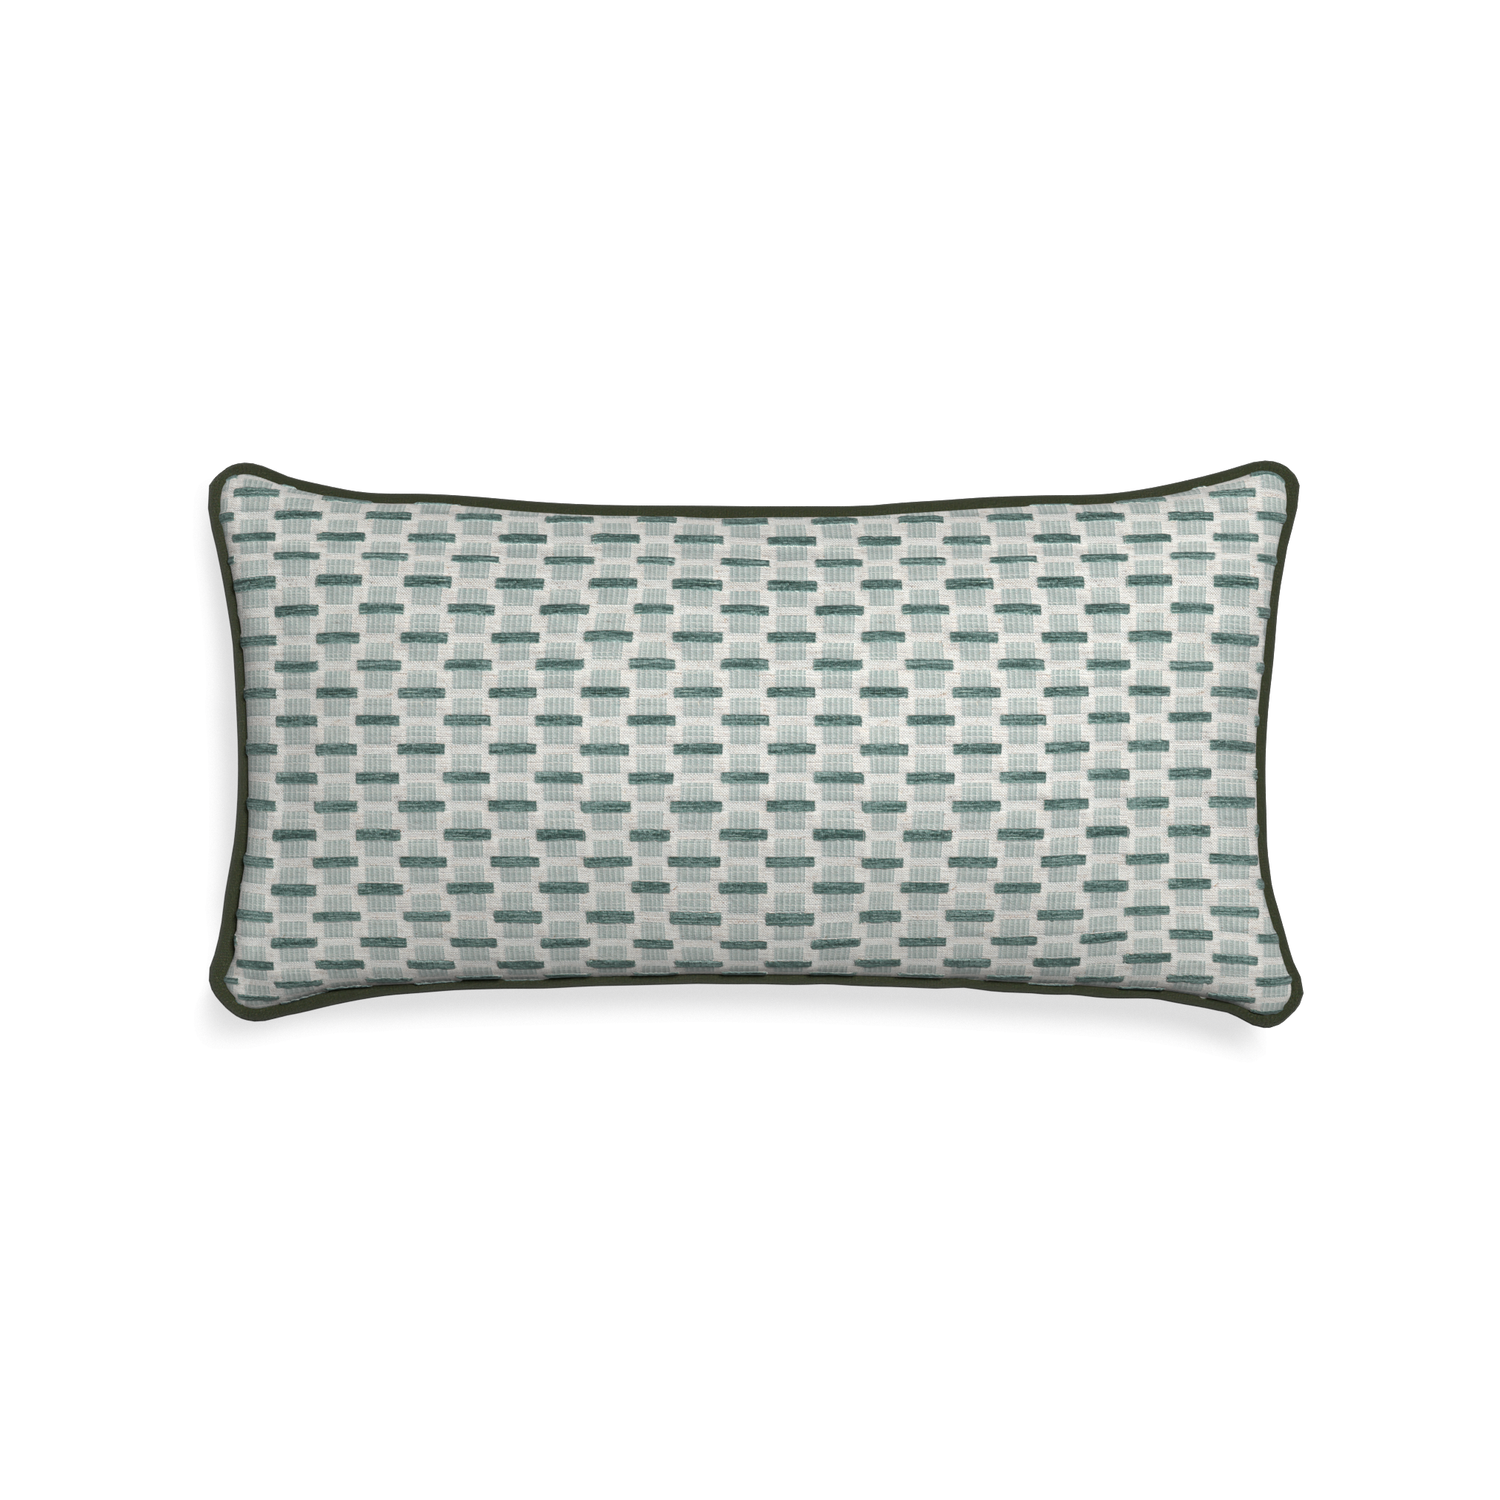 Midi-lumbar willow mint custom green geometric chenillepillow with f piping on white background